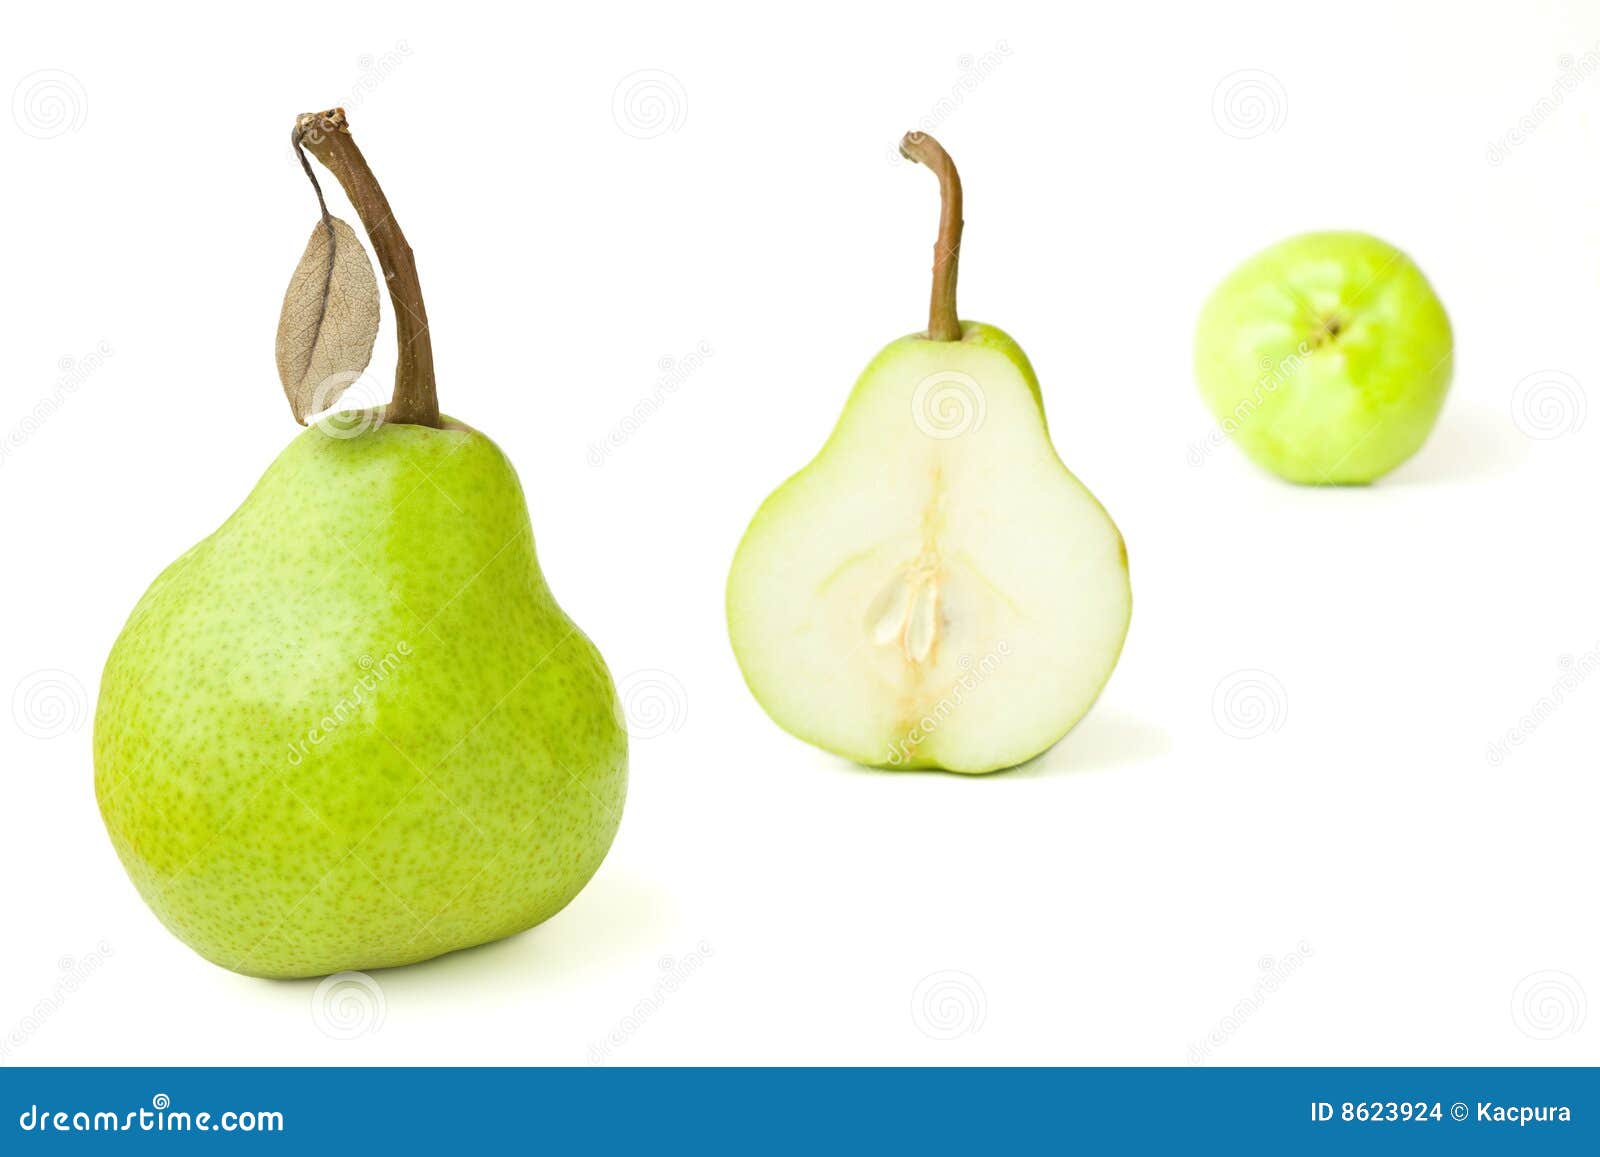 group of fresh pears with one halved